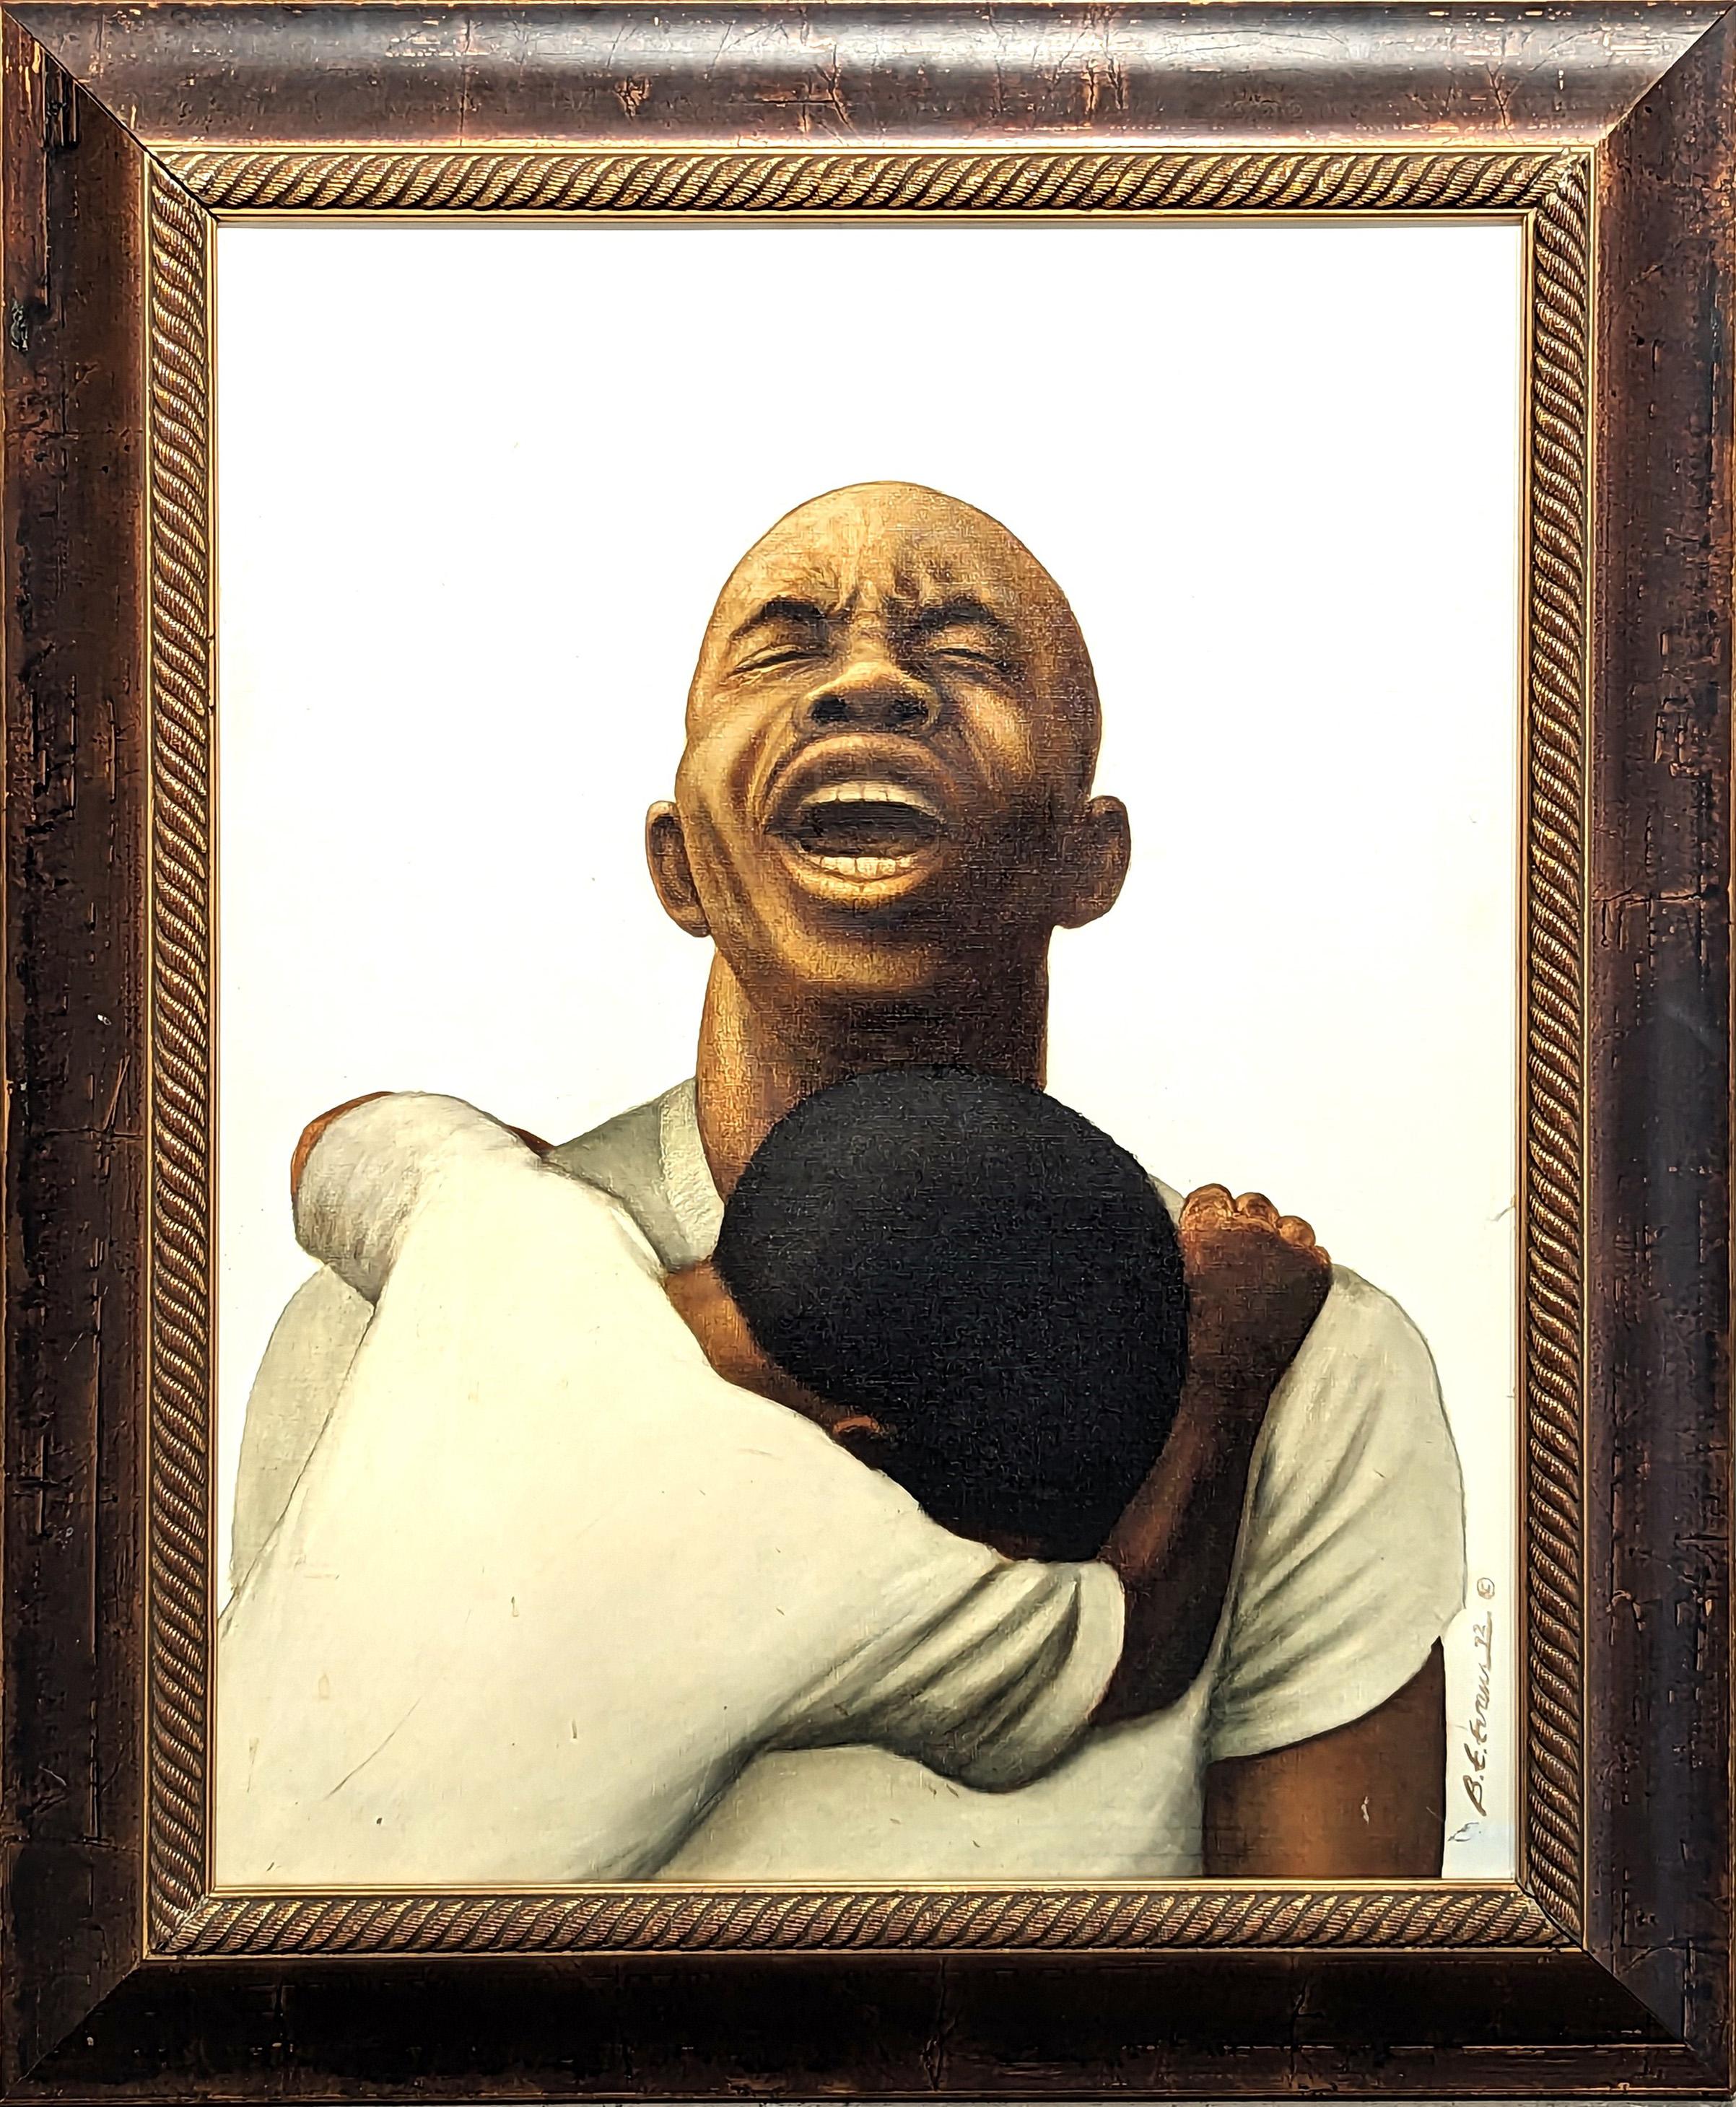 Buford Evans Portrait Painting - “God Save the Children” Early Figurative Portrait of an Anguished Black Man